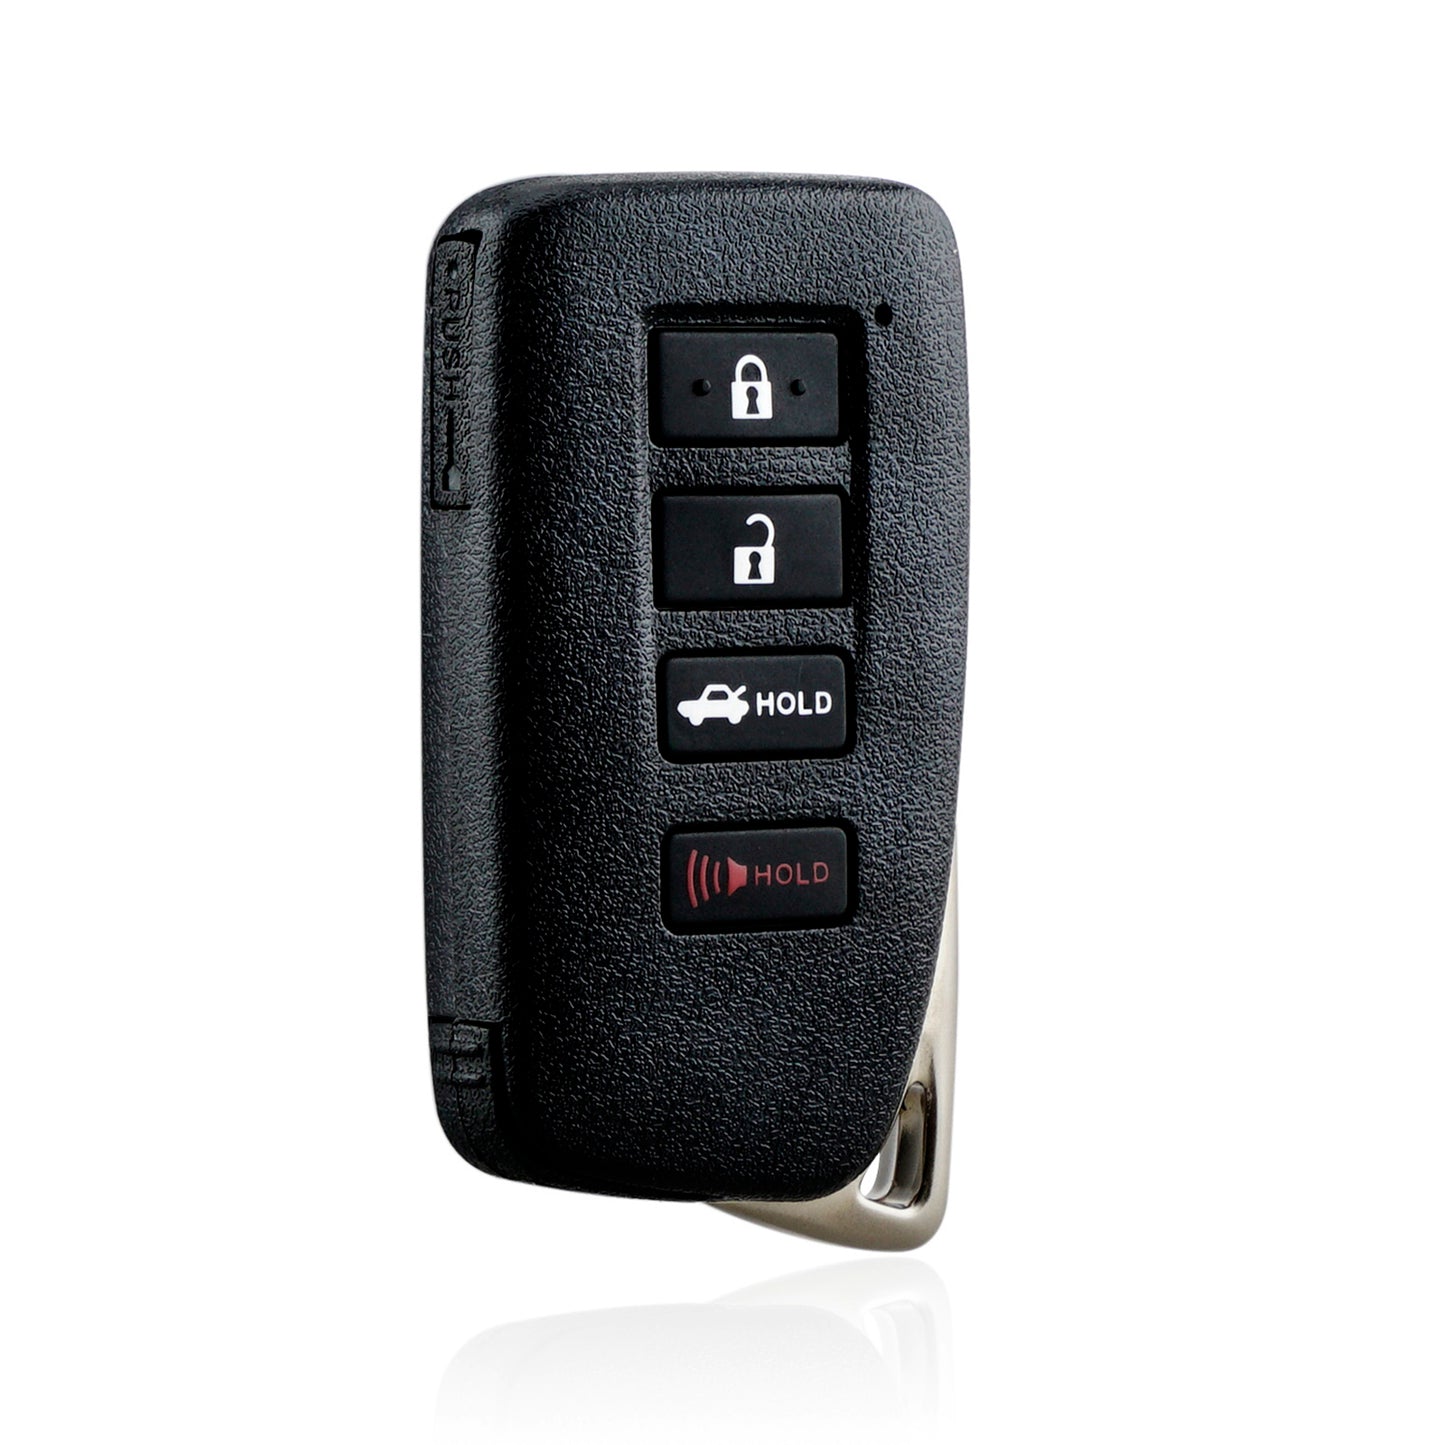 4 Buttons 315MHz Keyless Entry Fob Remote Car Key For 2013-2020 Lexus IS200 200T 250 300 350 RC200t 300 350 ES300h FCC ID: HYQ14FBA SKU : J901